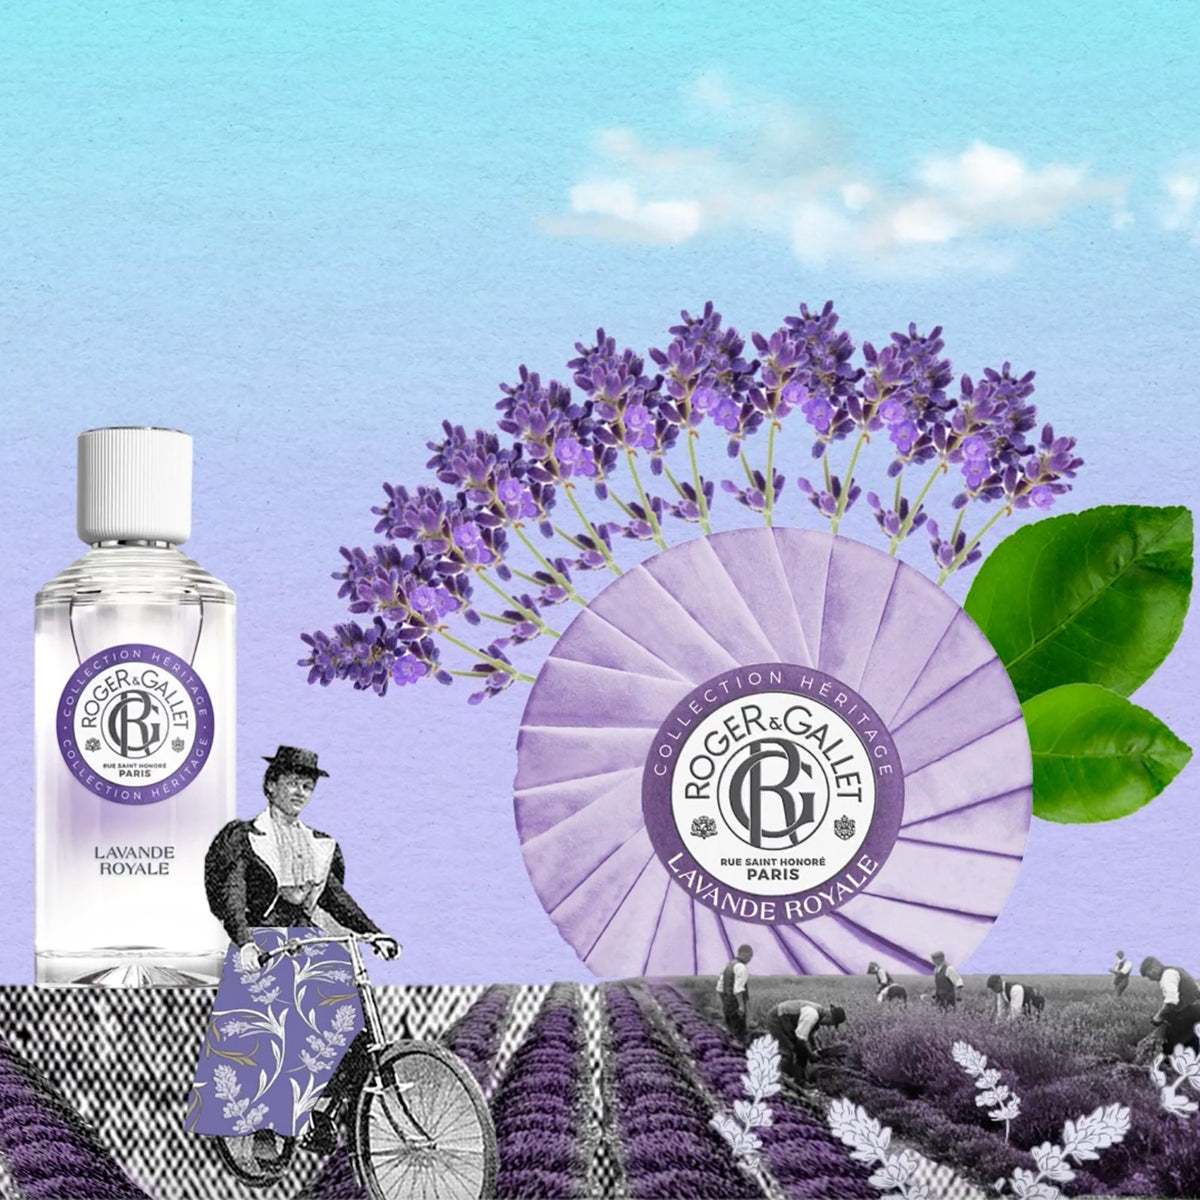 A square soap packaging for Roger & Gallet Royal Lavender - Wellbeing Soap - 3.5 oz with a purple and white color scheme and a detailed black and white seal at the center indicating it is made in France, infused with lavender essential